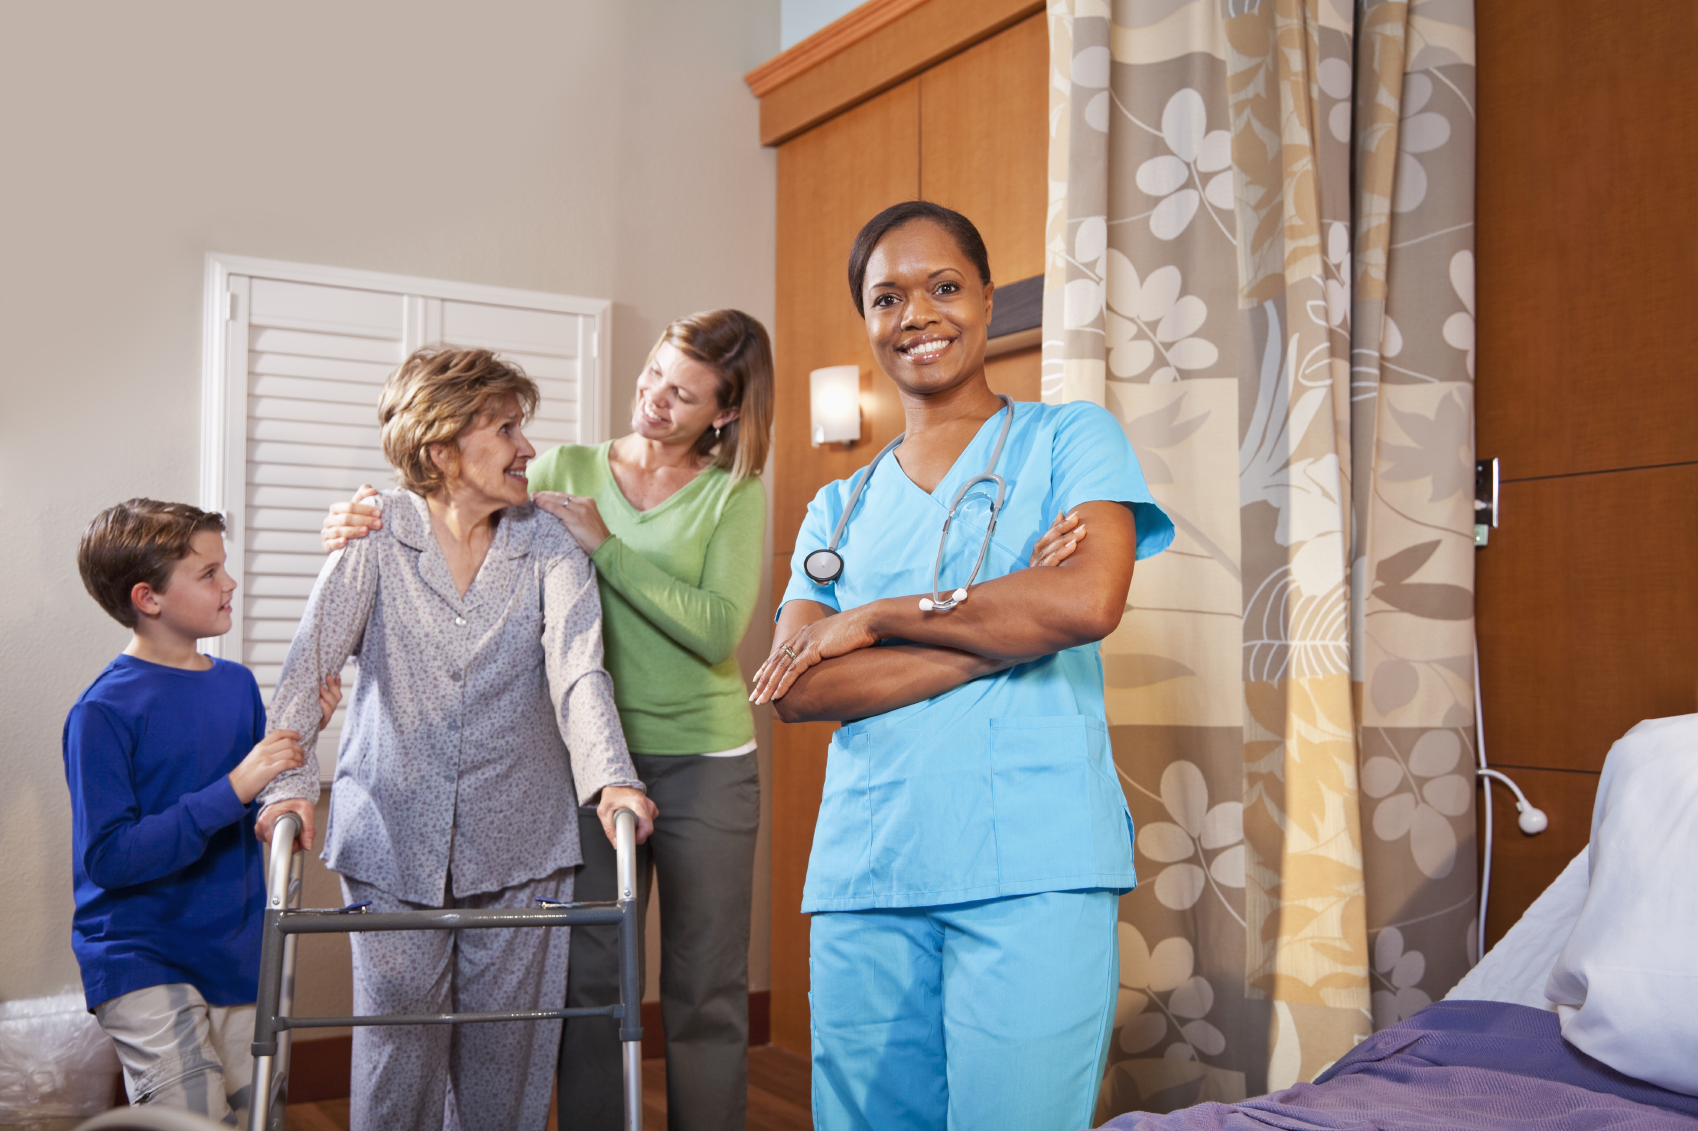 Is a Job in Community Health Nursing Right for You?